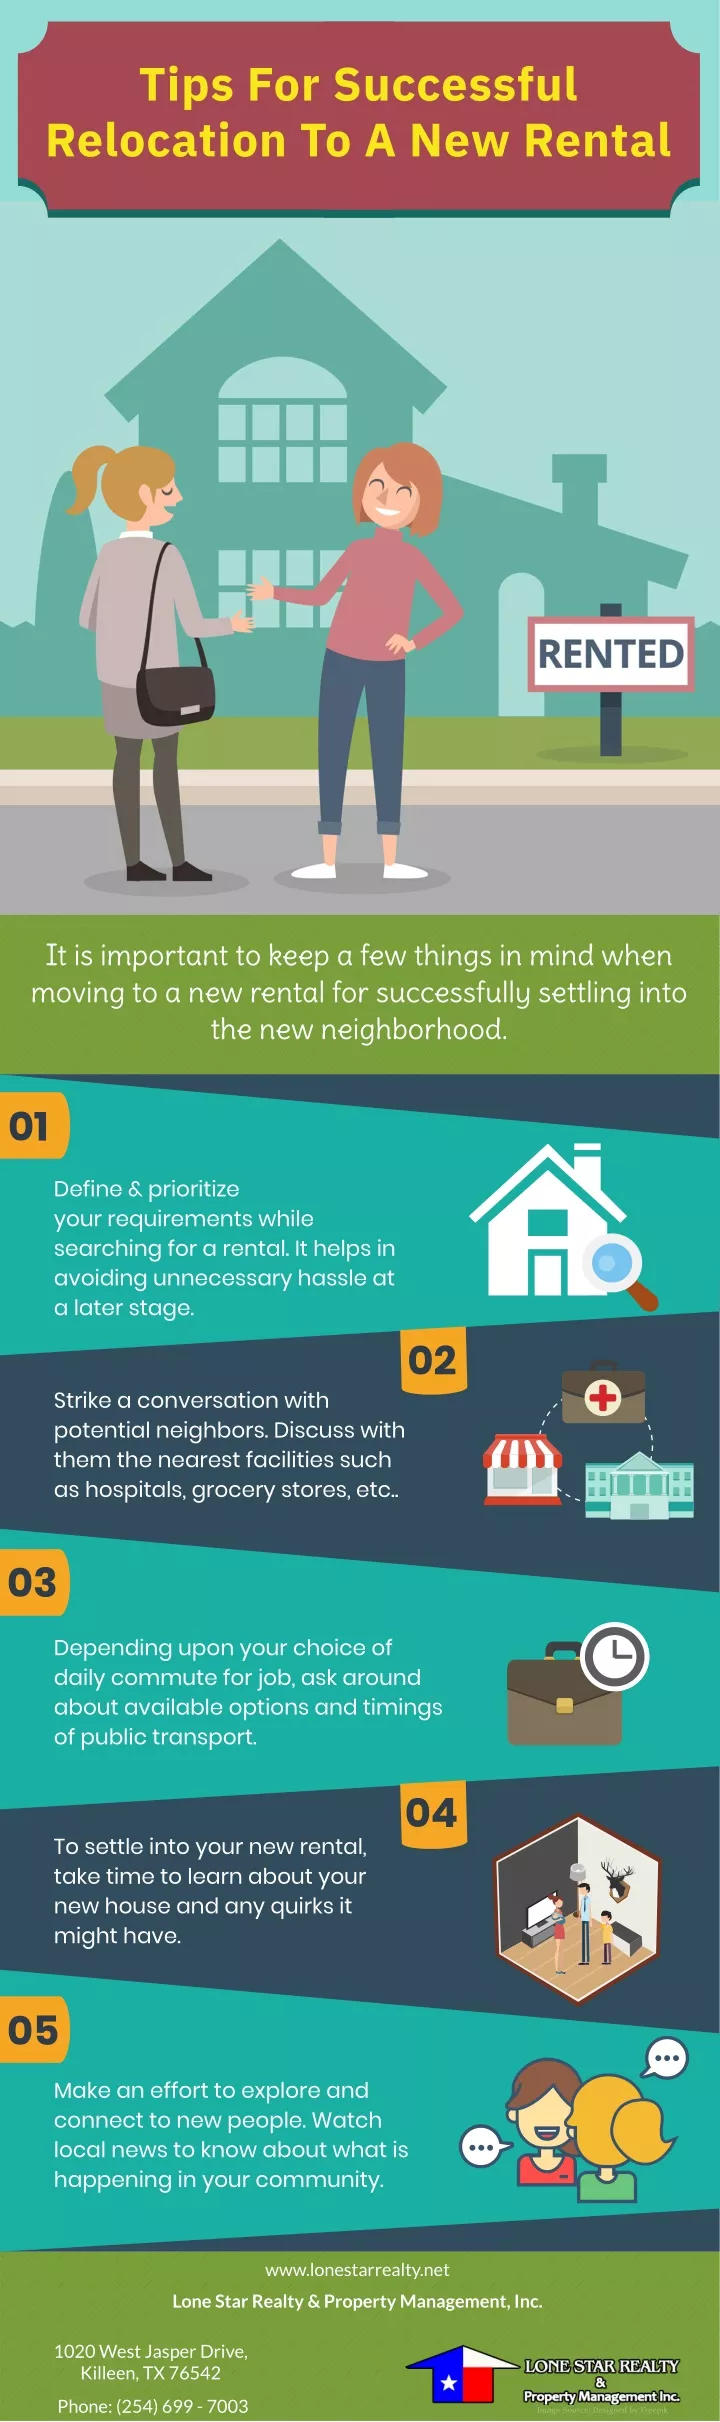 tips for successful relocation to a new rental